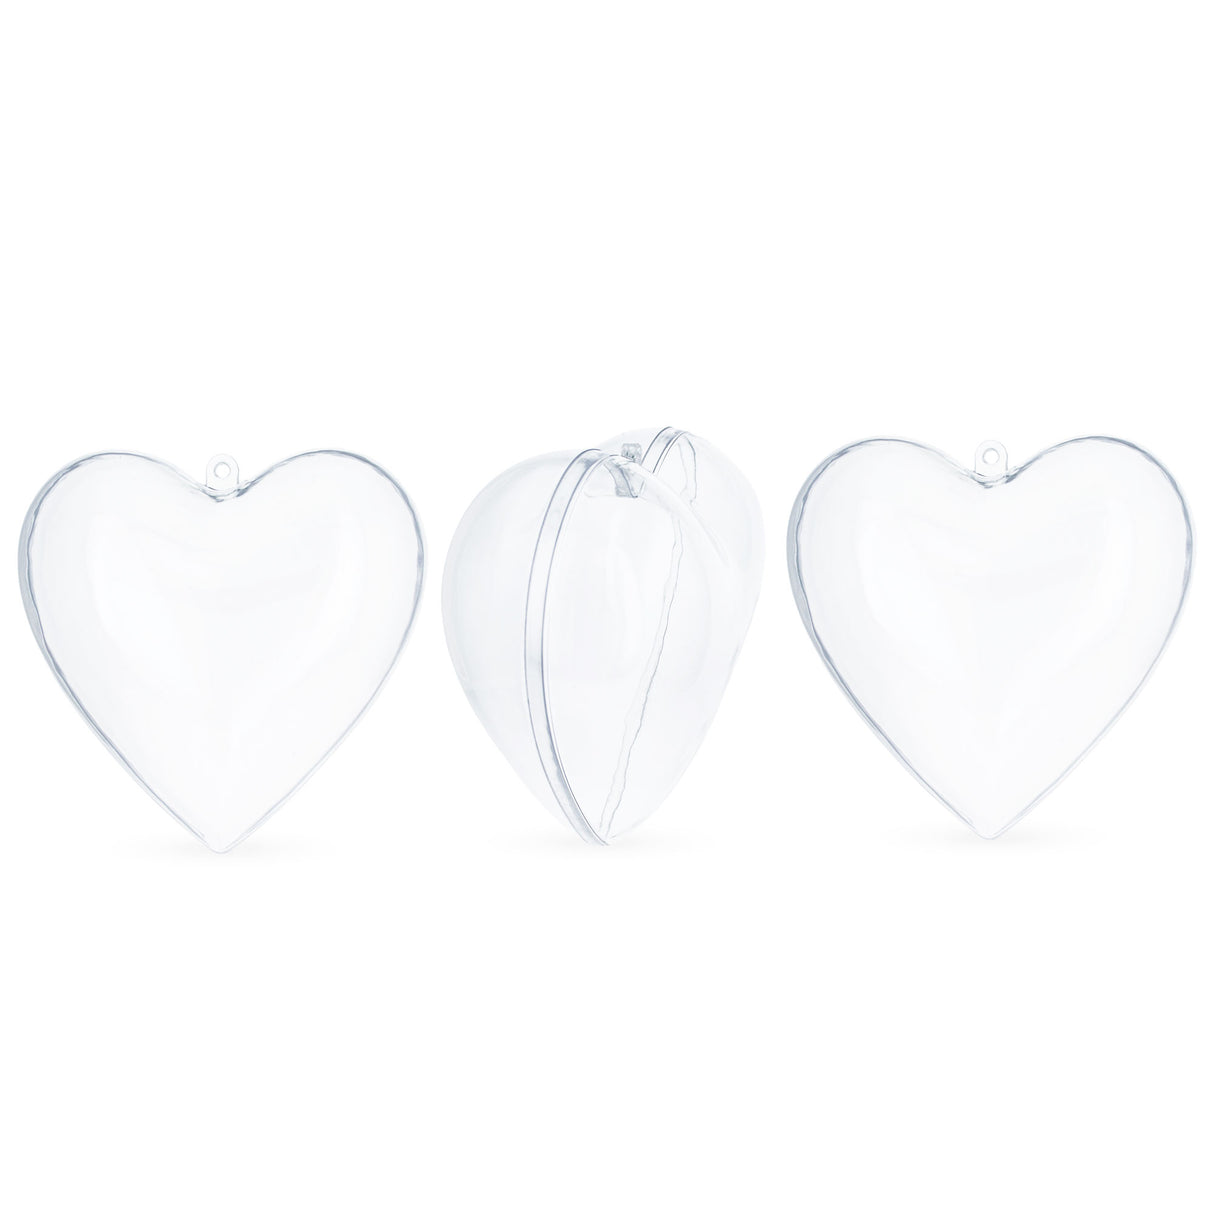 Plastic Set of 3 Clear Plastic Heart Ornaments 3.85 Inches (98 mm) in Clear color Heart